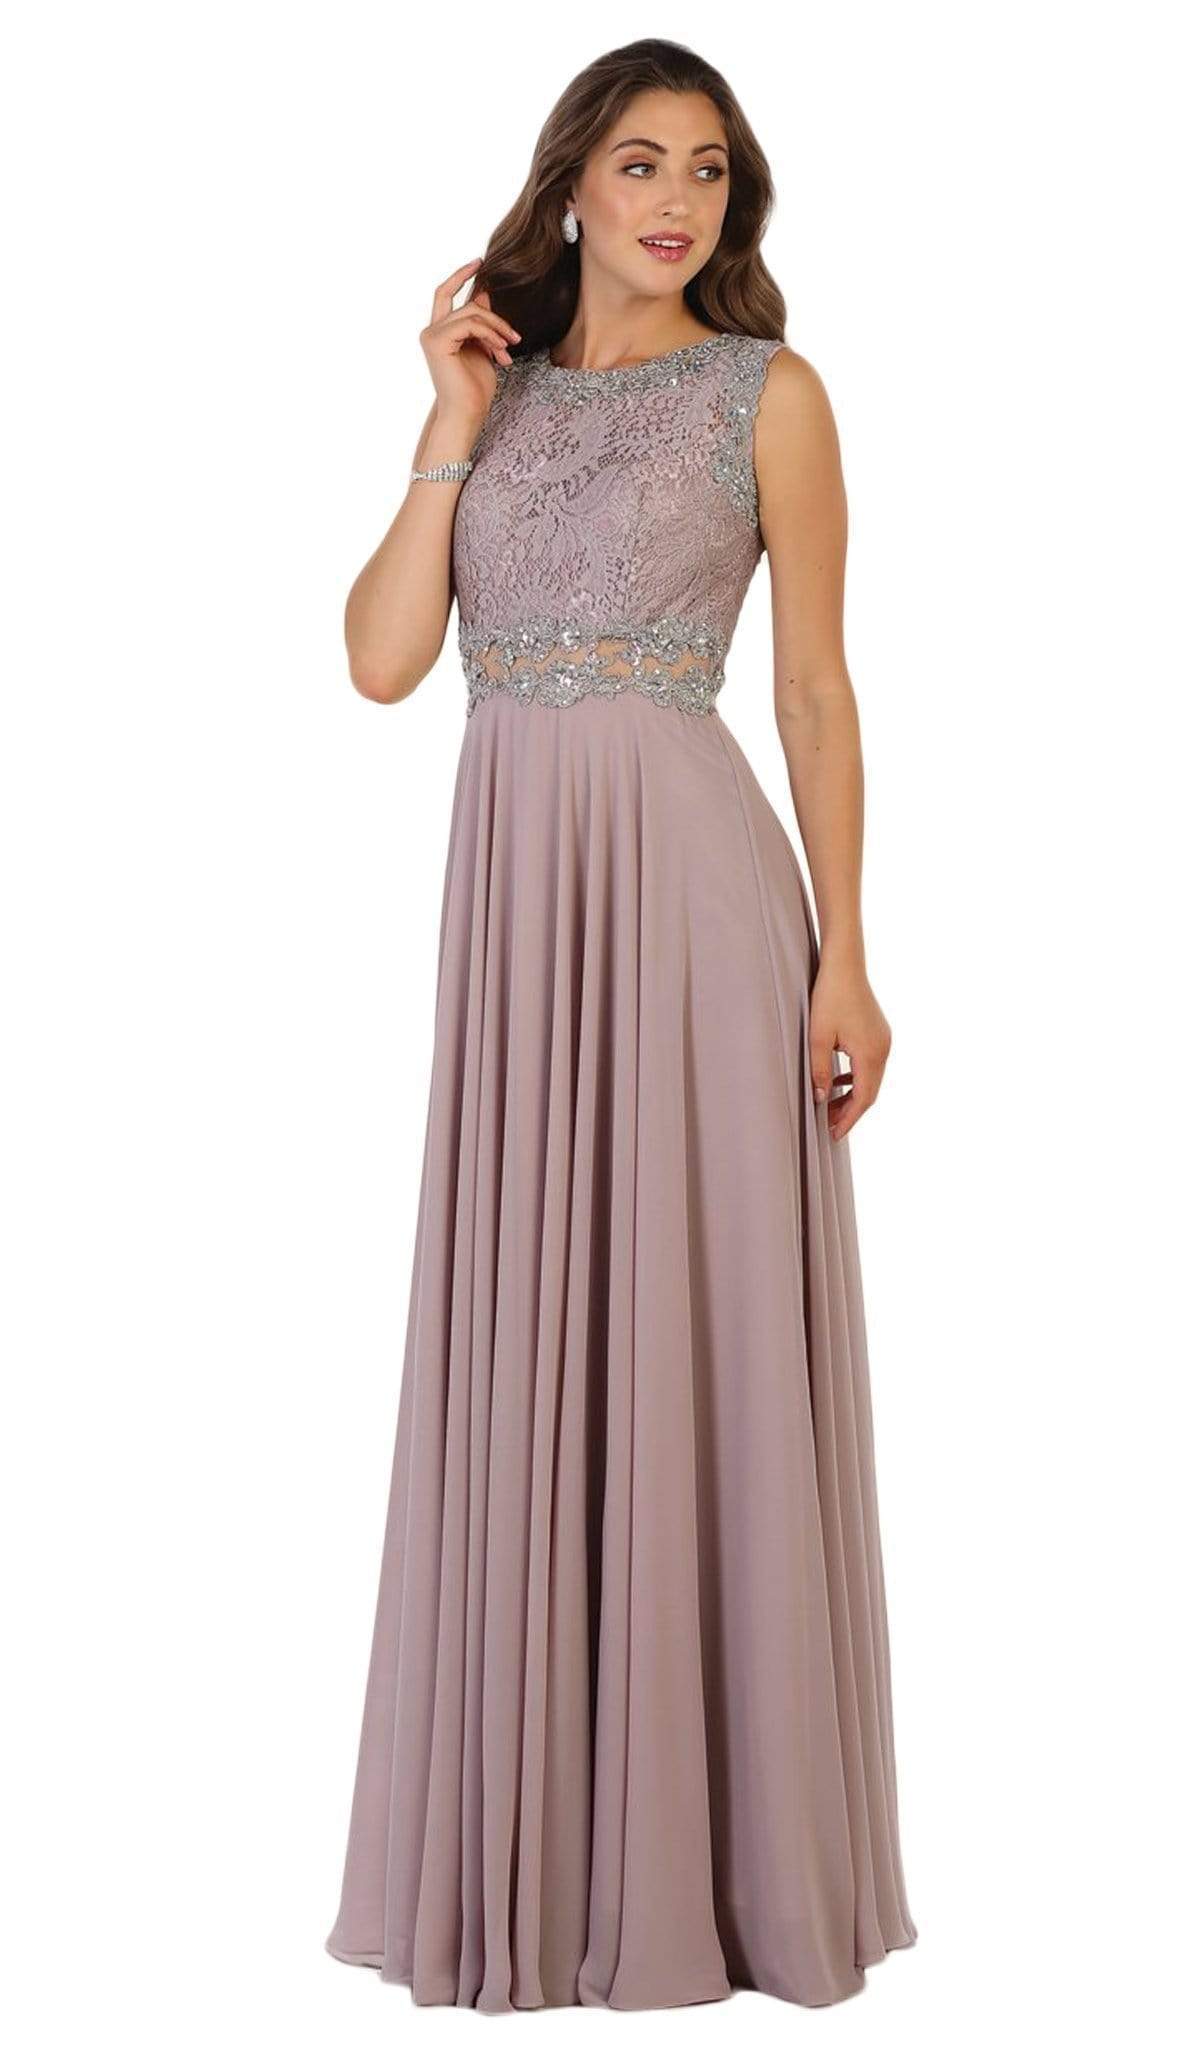 May Queen - Embellished Lace Pleated Prom Dress Bridesmaid Dresses 4 / Mauve